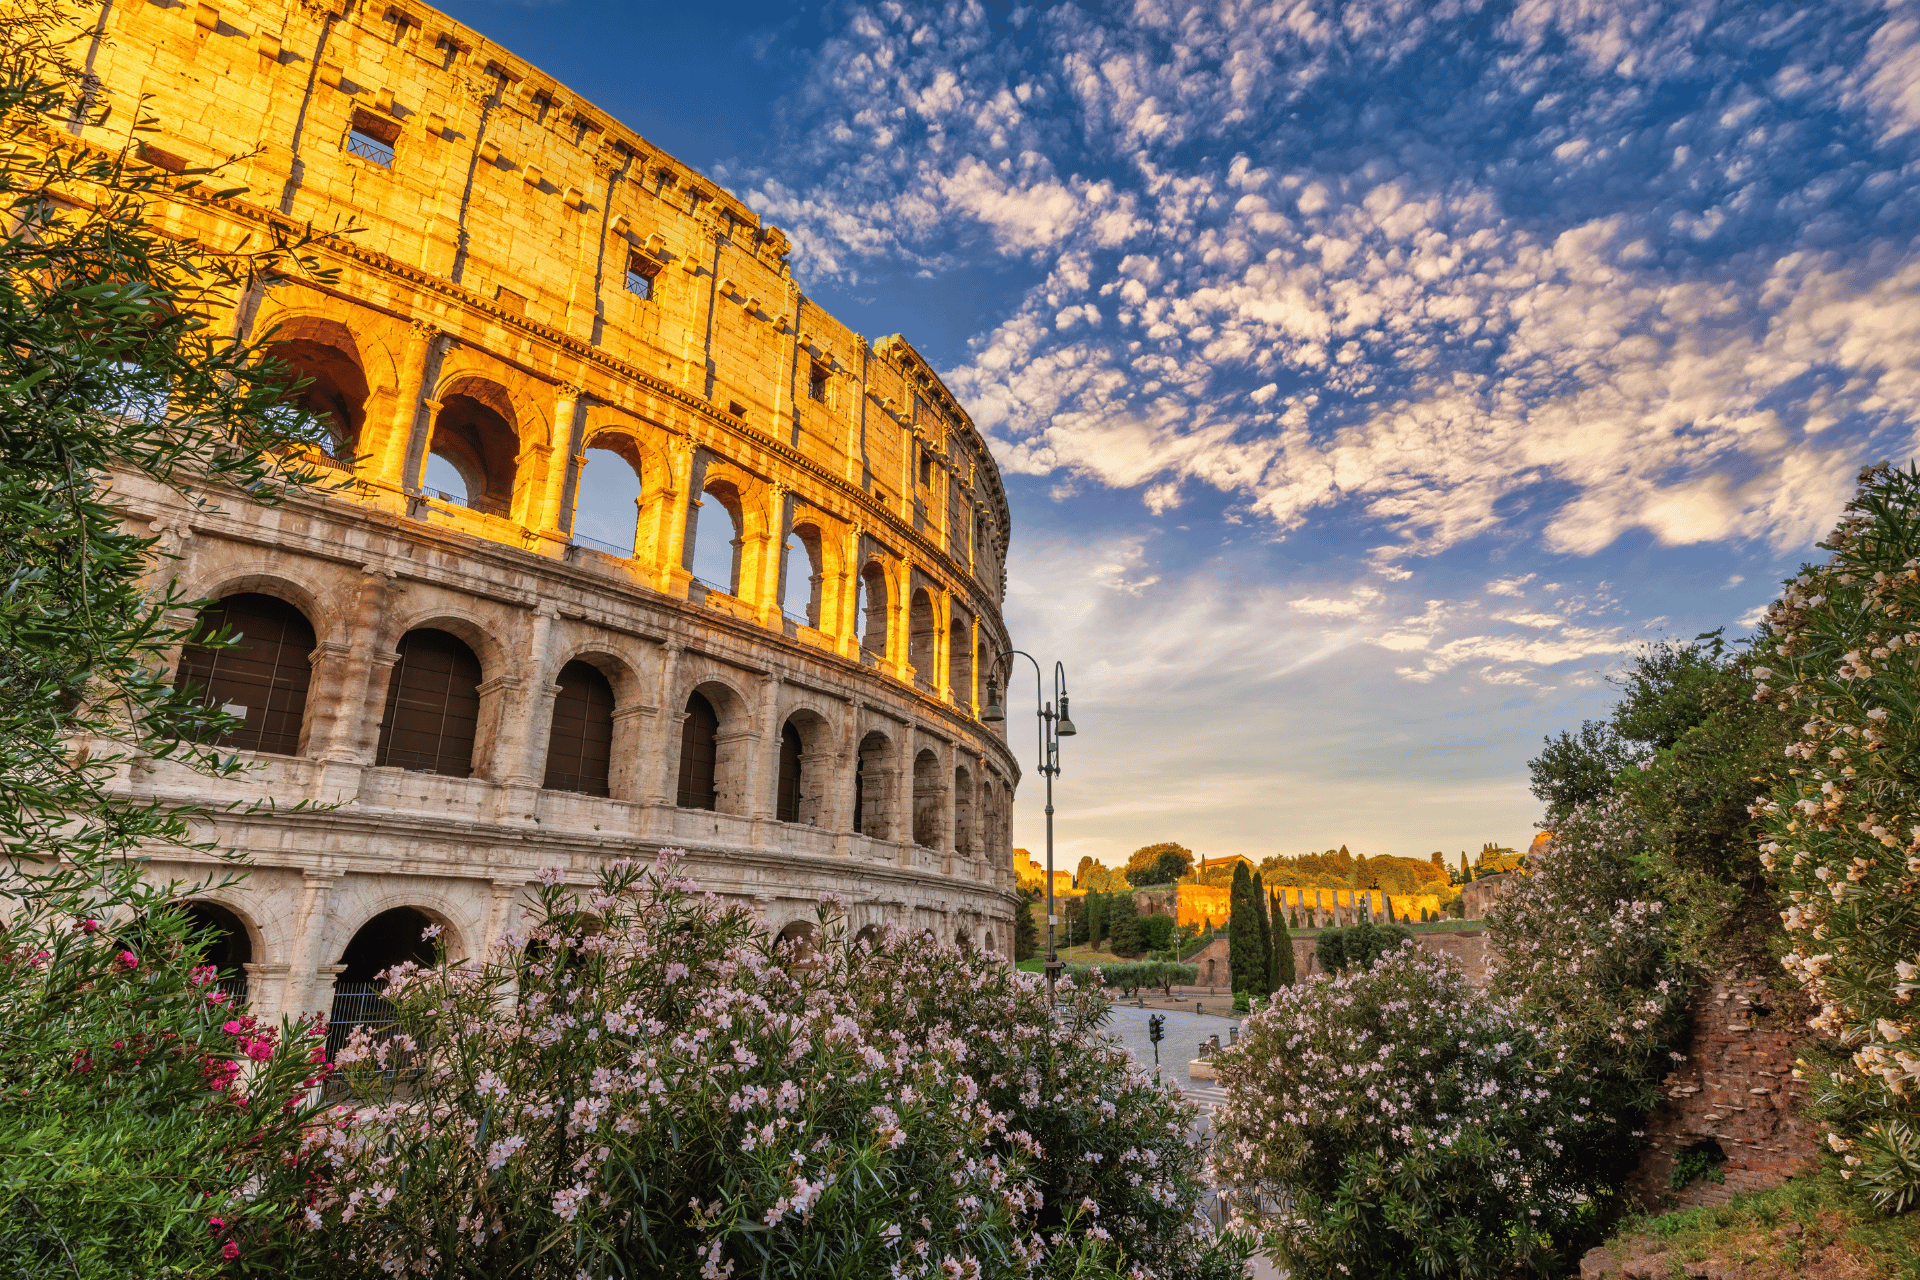 The Colosseum of Rome, Italy